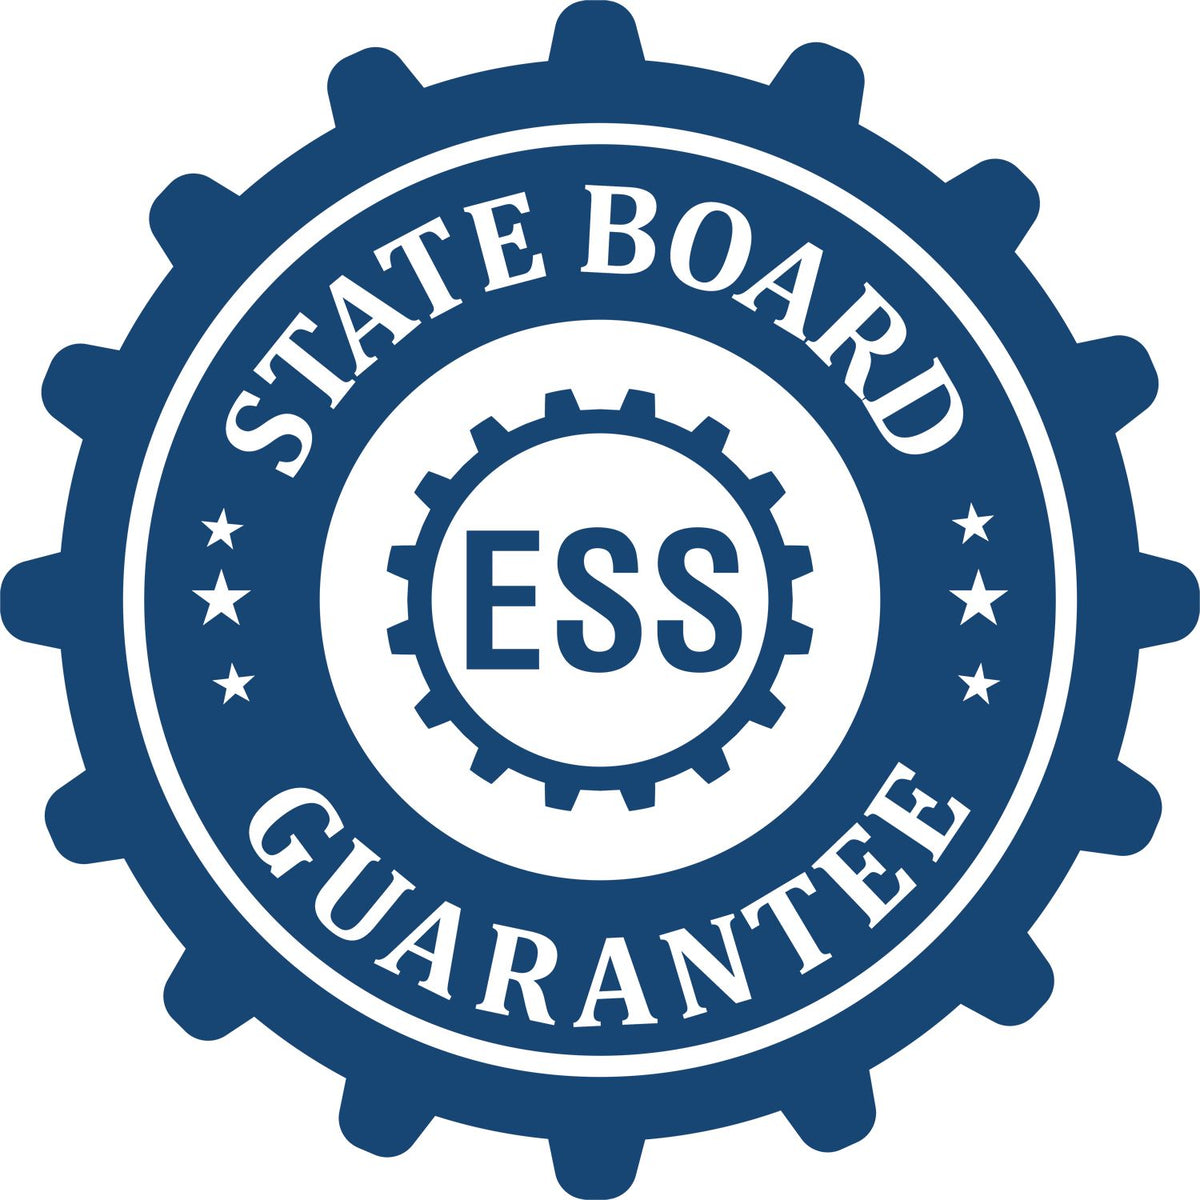 An emblem in a gear shape illustrating a state board guarantee for the Digital District of Columbia Geologist Stamp, Electronic Seal for District of Columbia Geologist